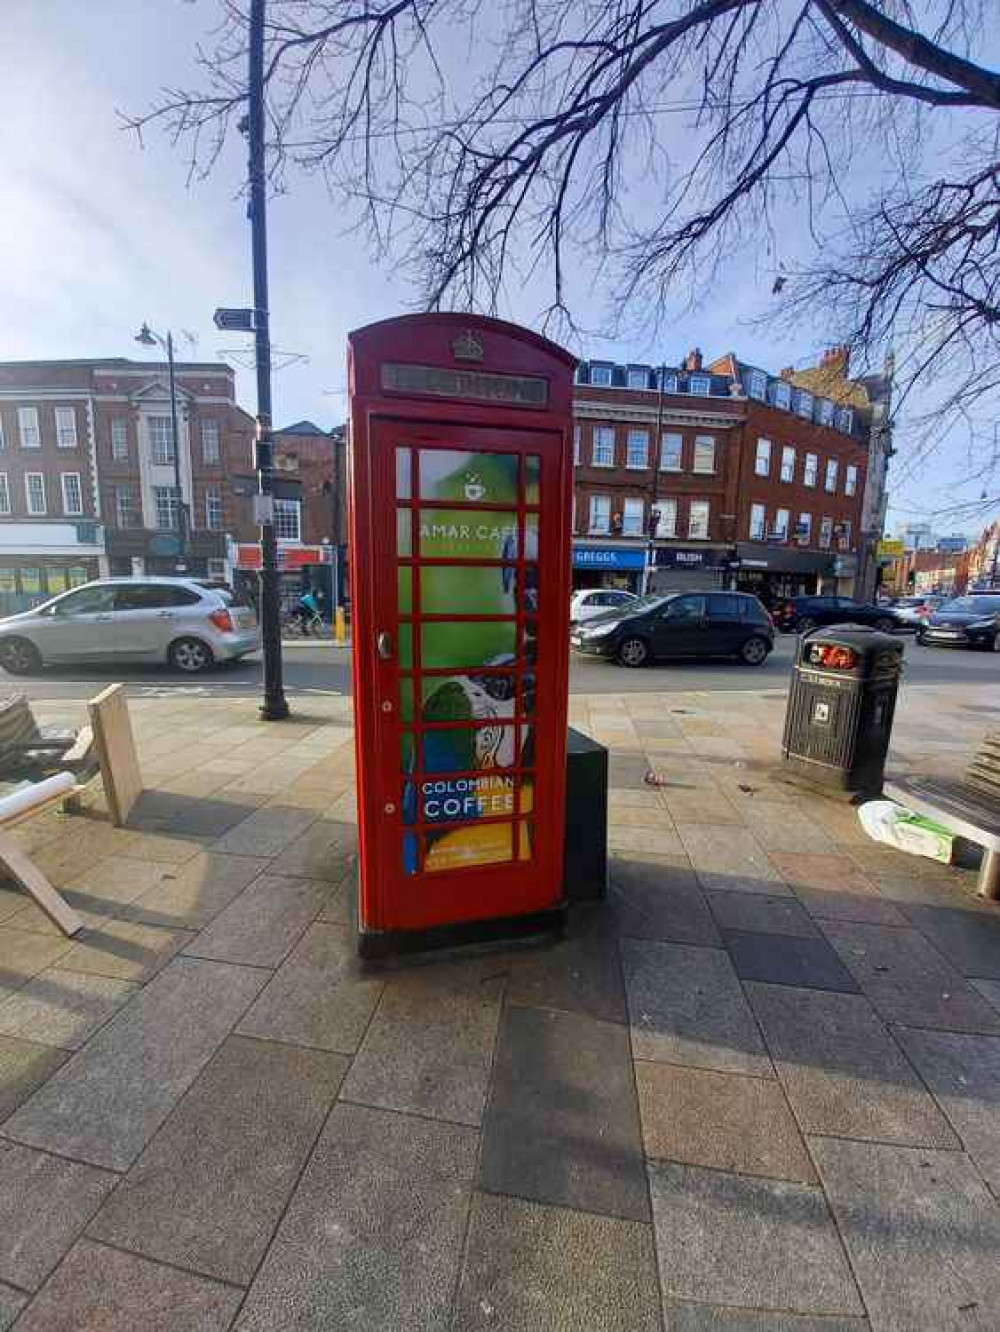 This phone box is becoming a coffee kiosk. Photo courtesy of Con O'Brien